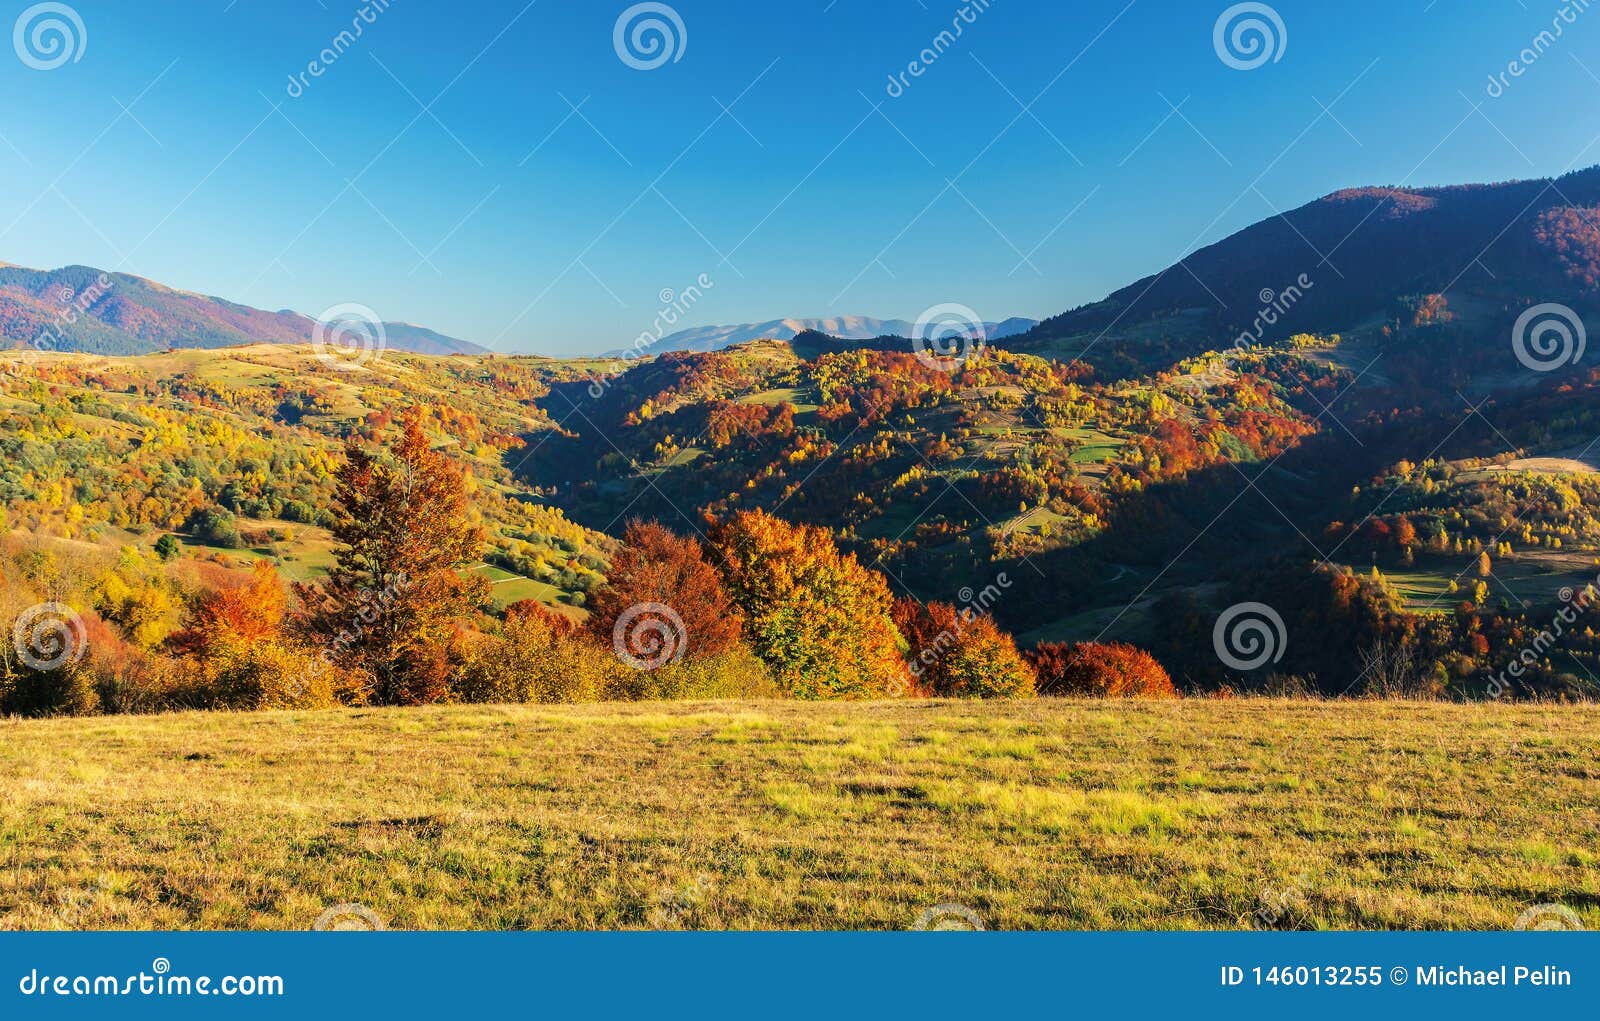 Wonderful Autumn Afternoon In Mountains Stock Image Image Of Meadow